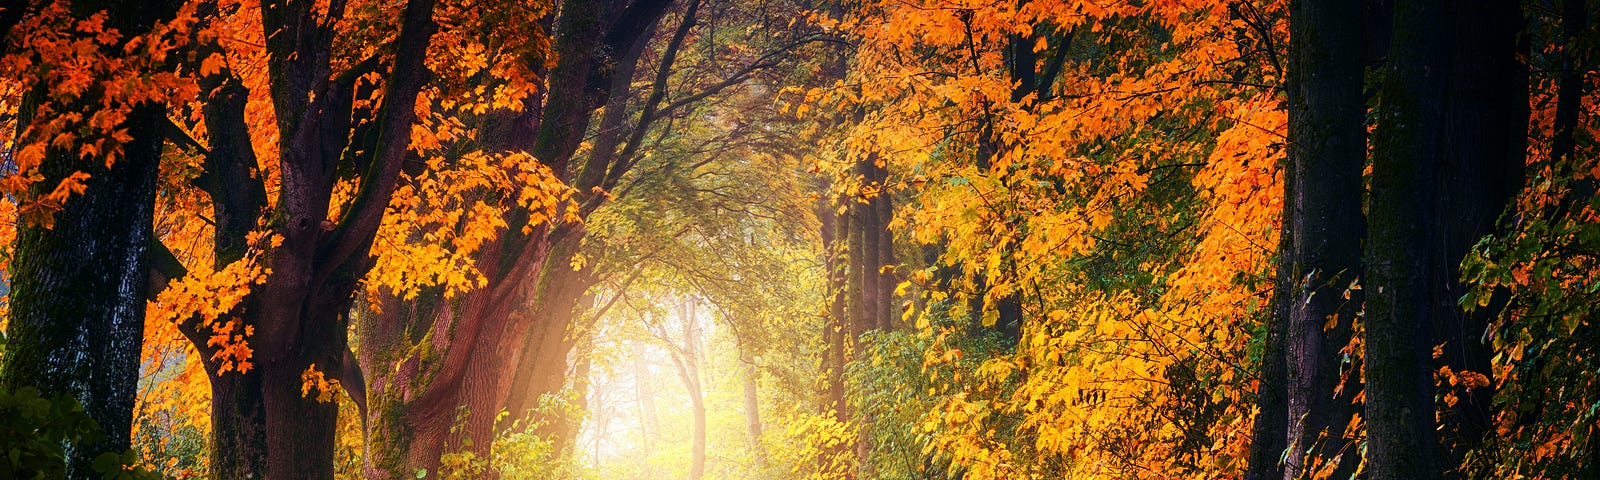 Autumn-leaf-littered path in a forest with the sun in the horizon.